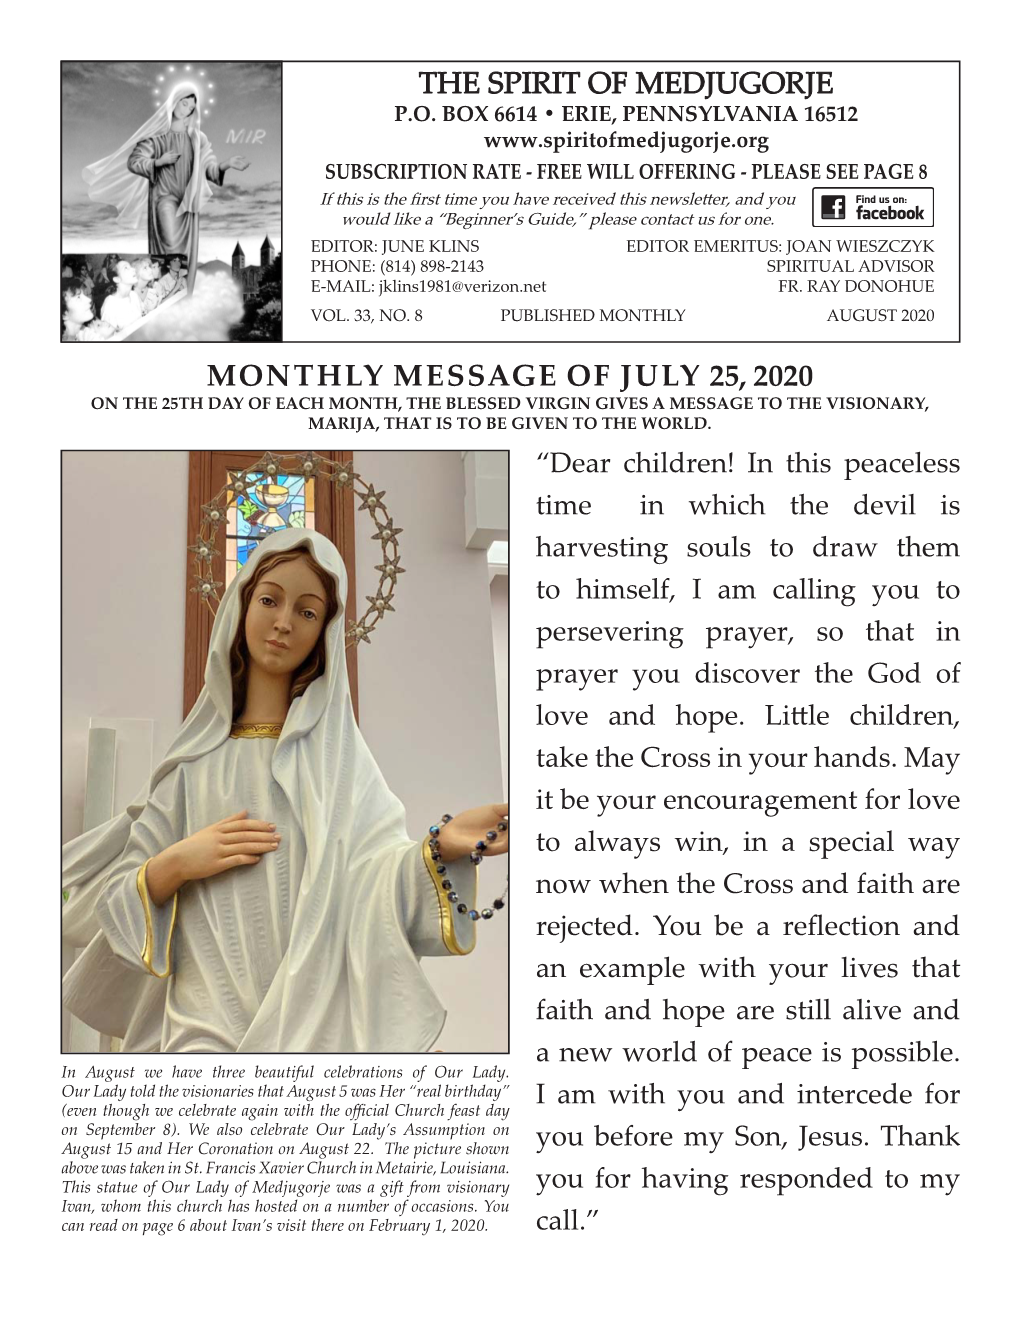 The Spirit of Medjugorje Monthly Message of July 25